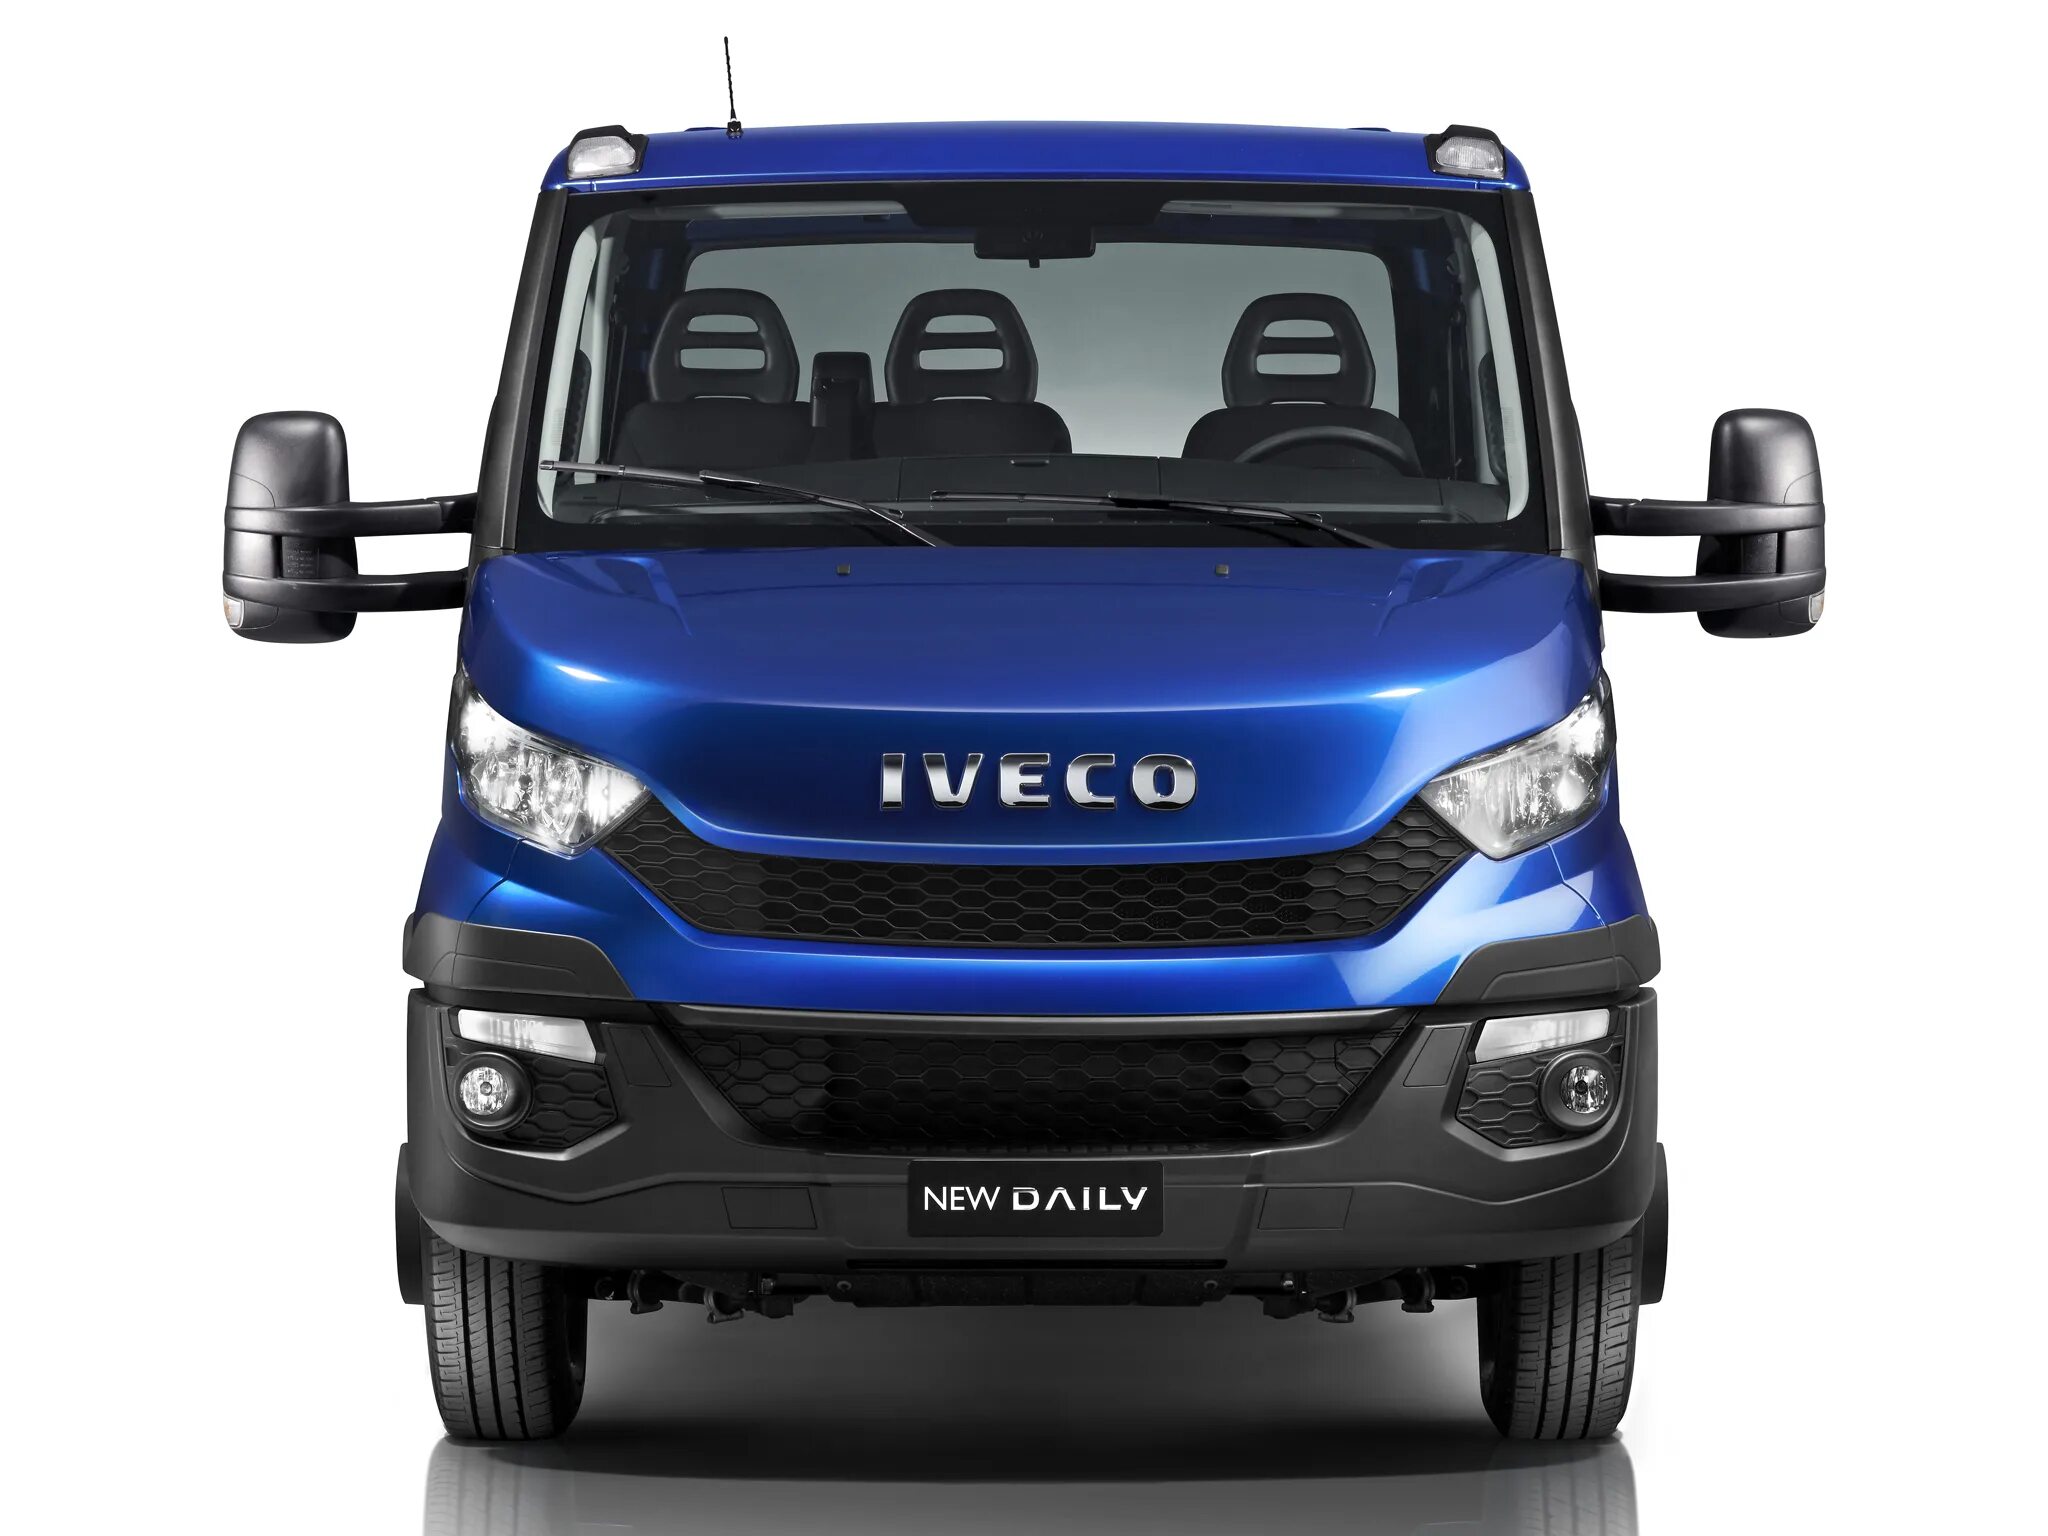 Iveco Daily. Iveco Daily 2014. Ивеко Дейли фургон 2014. Iveco Daily 6. Ивеко дейли 2014